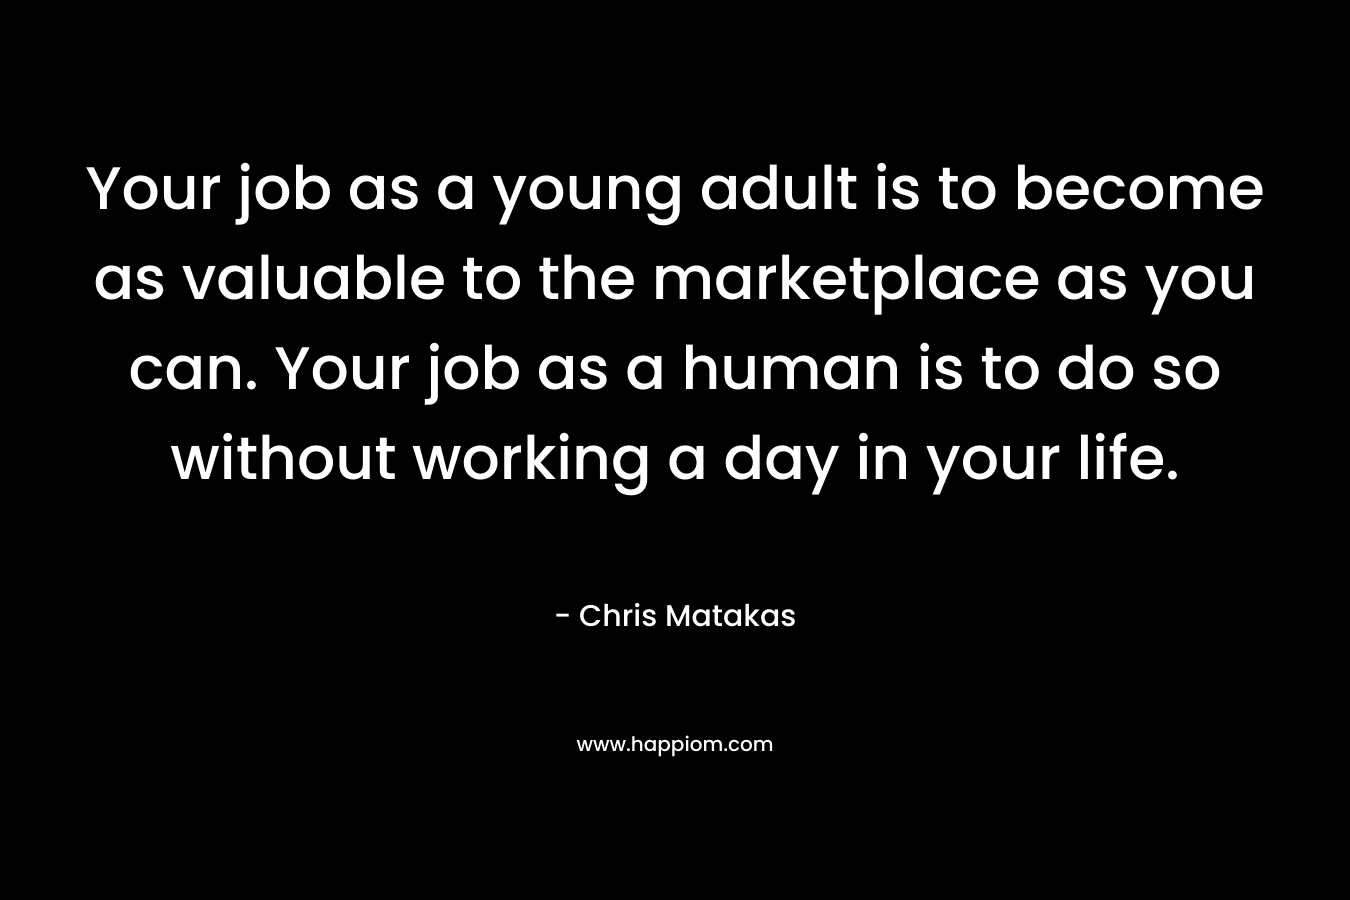 Your job as a young adult is to become as valuable to the marketplace as you can. Your job as a human is to do so without working a day in your life.